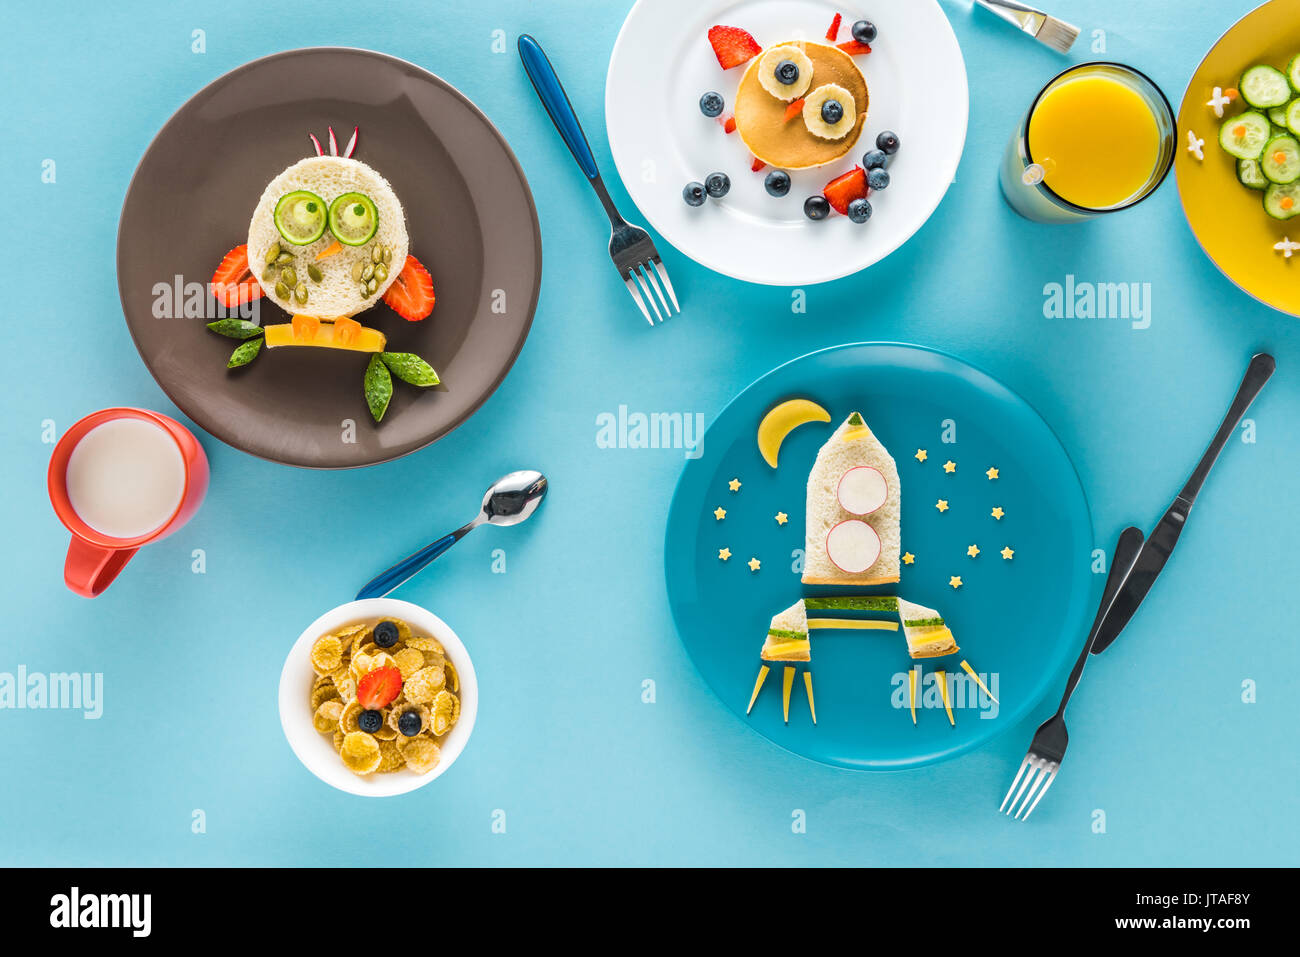 flat lay with creatively styled children's breakfast with drinks on plates Stock Photo